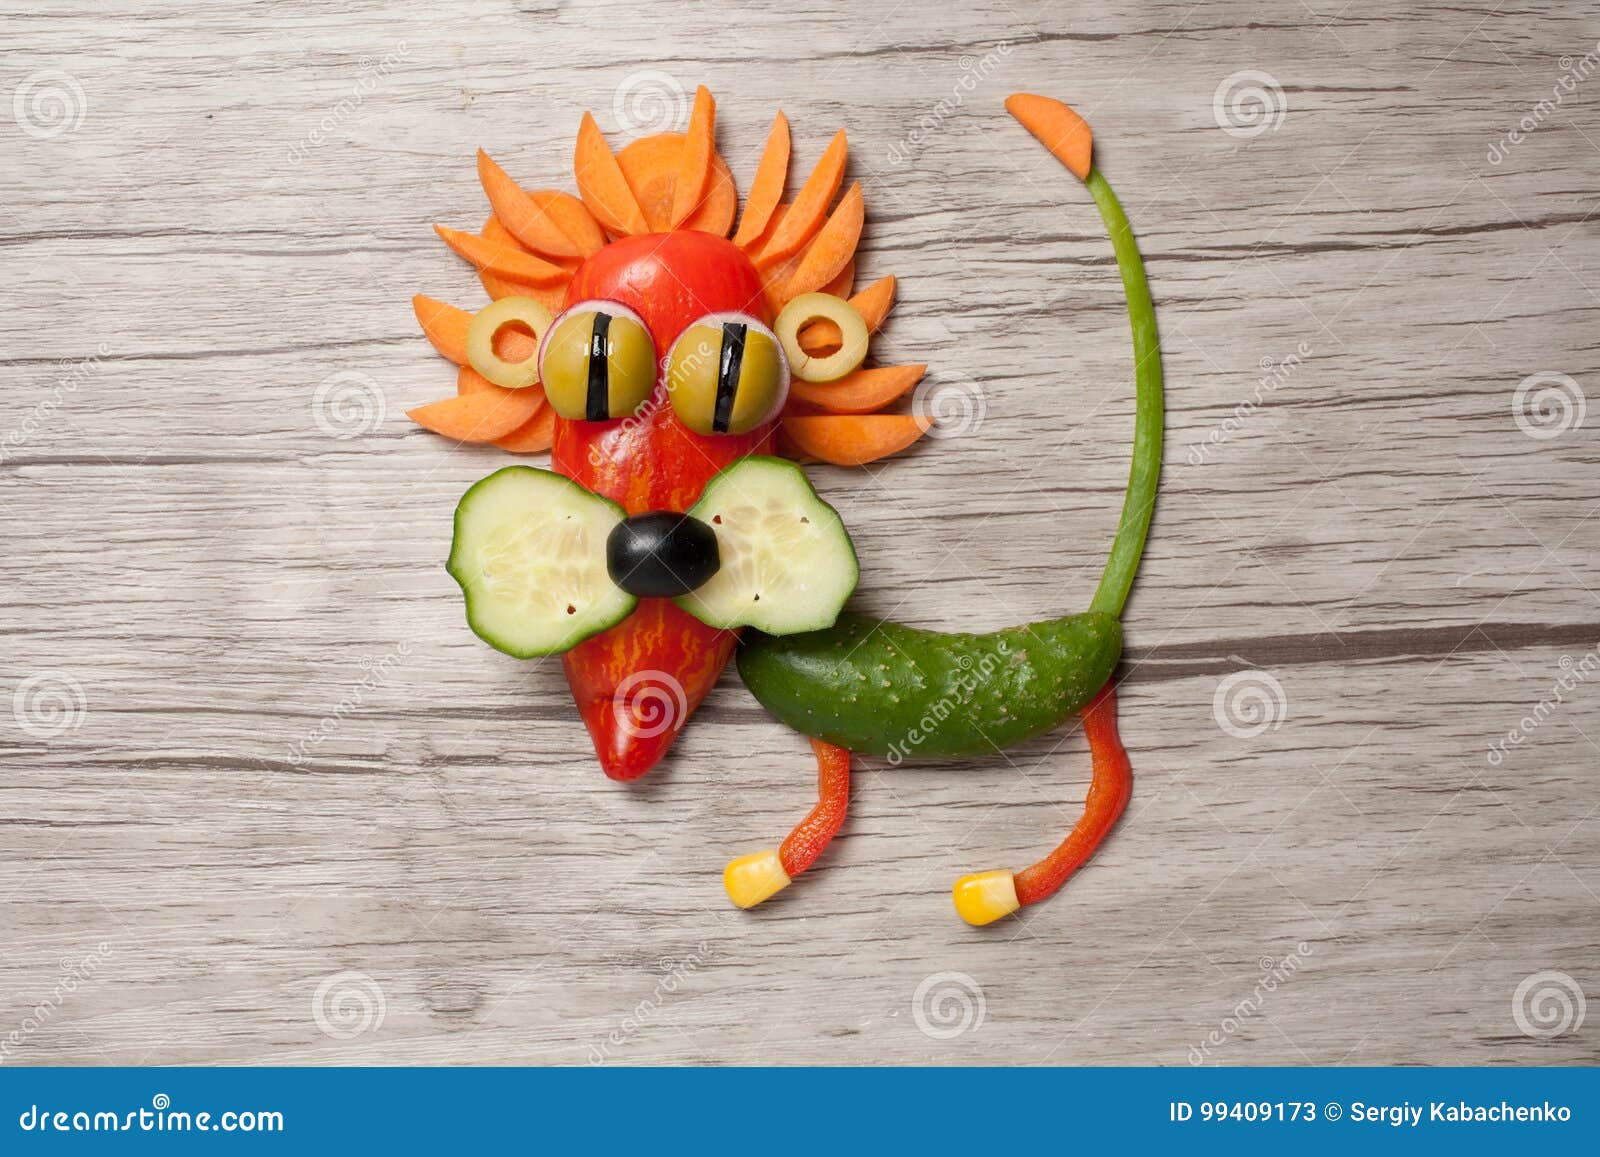 Lion Made of Vegetables on Wooden Background Stock Image - Image of food,  organic: 99409173